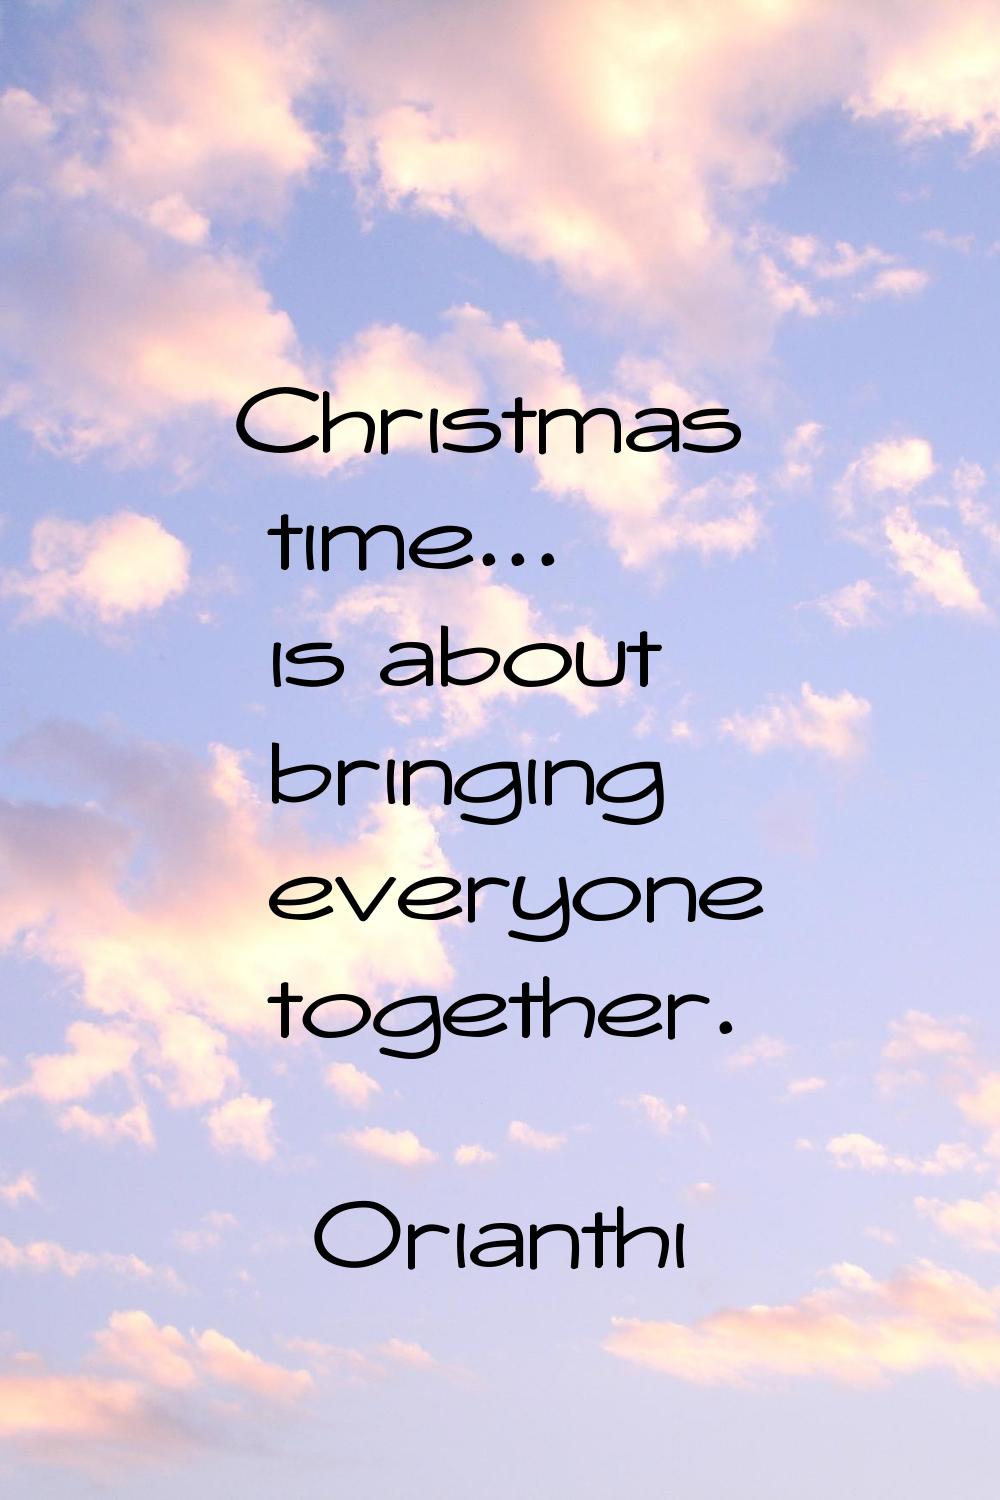 Christmas time... is about bringing everyone together.